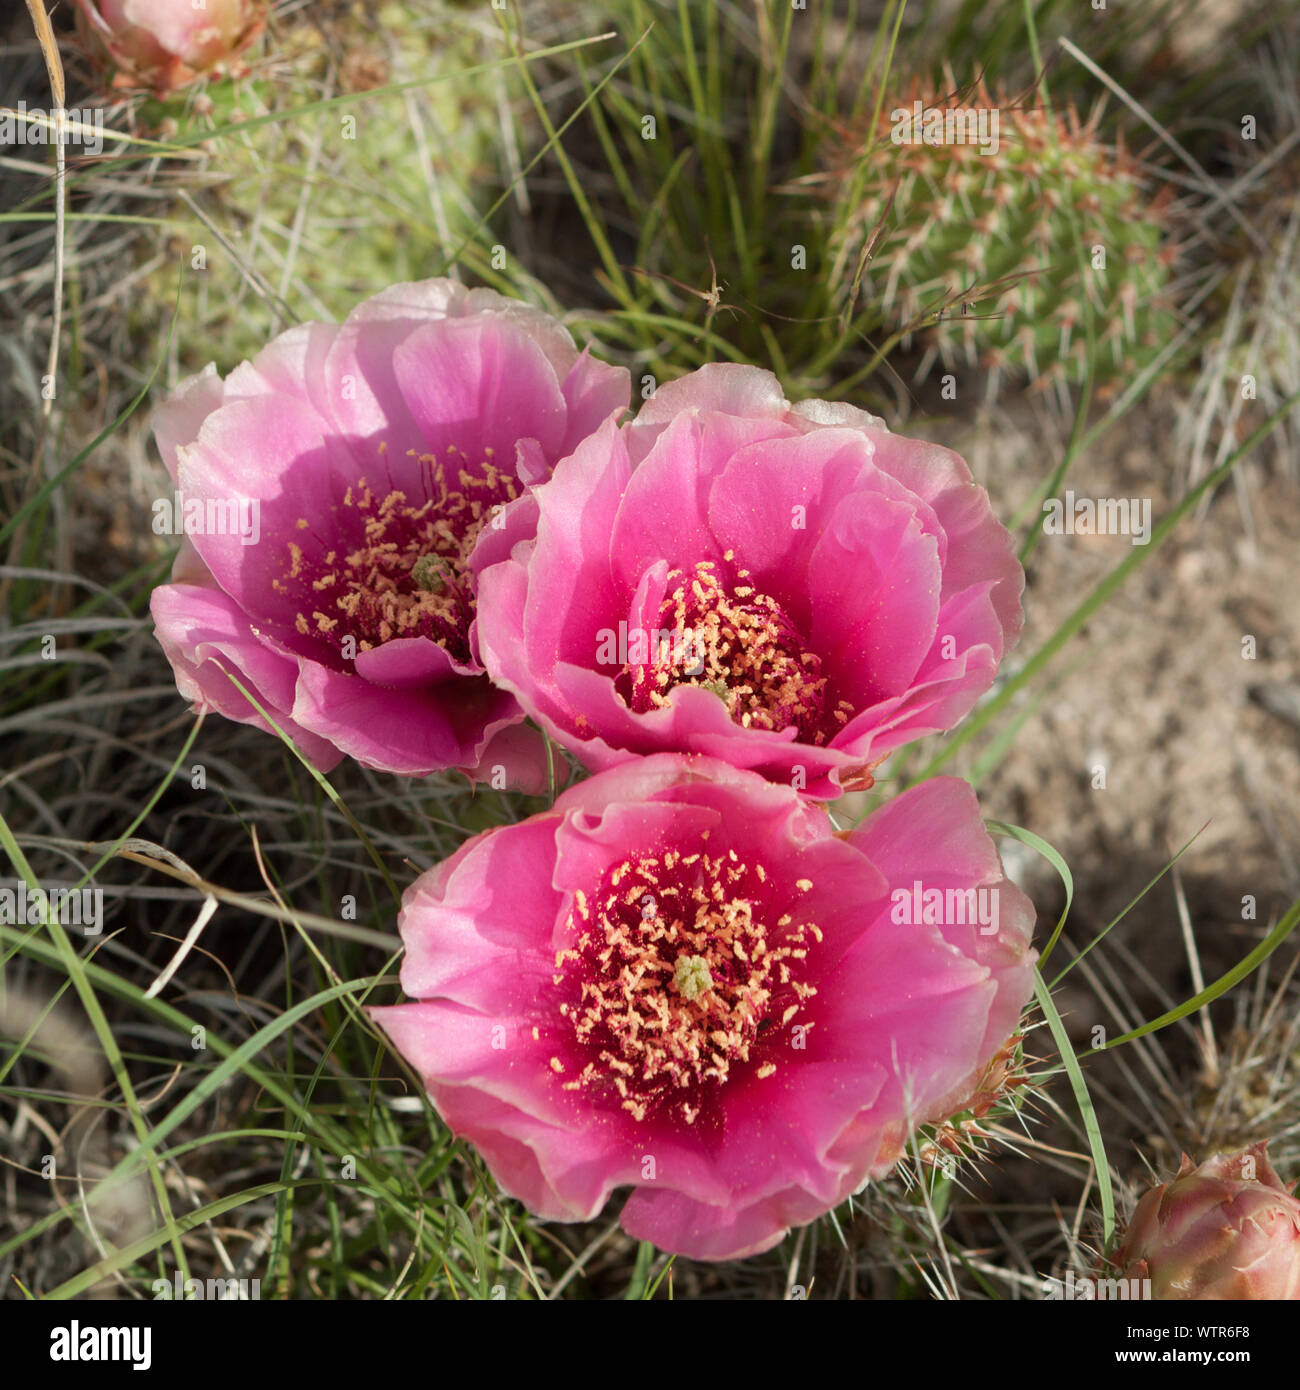 Three pink prickly pear blossoms in a square image Stock Photo